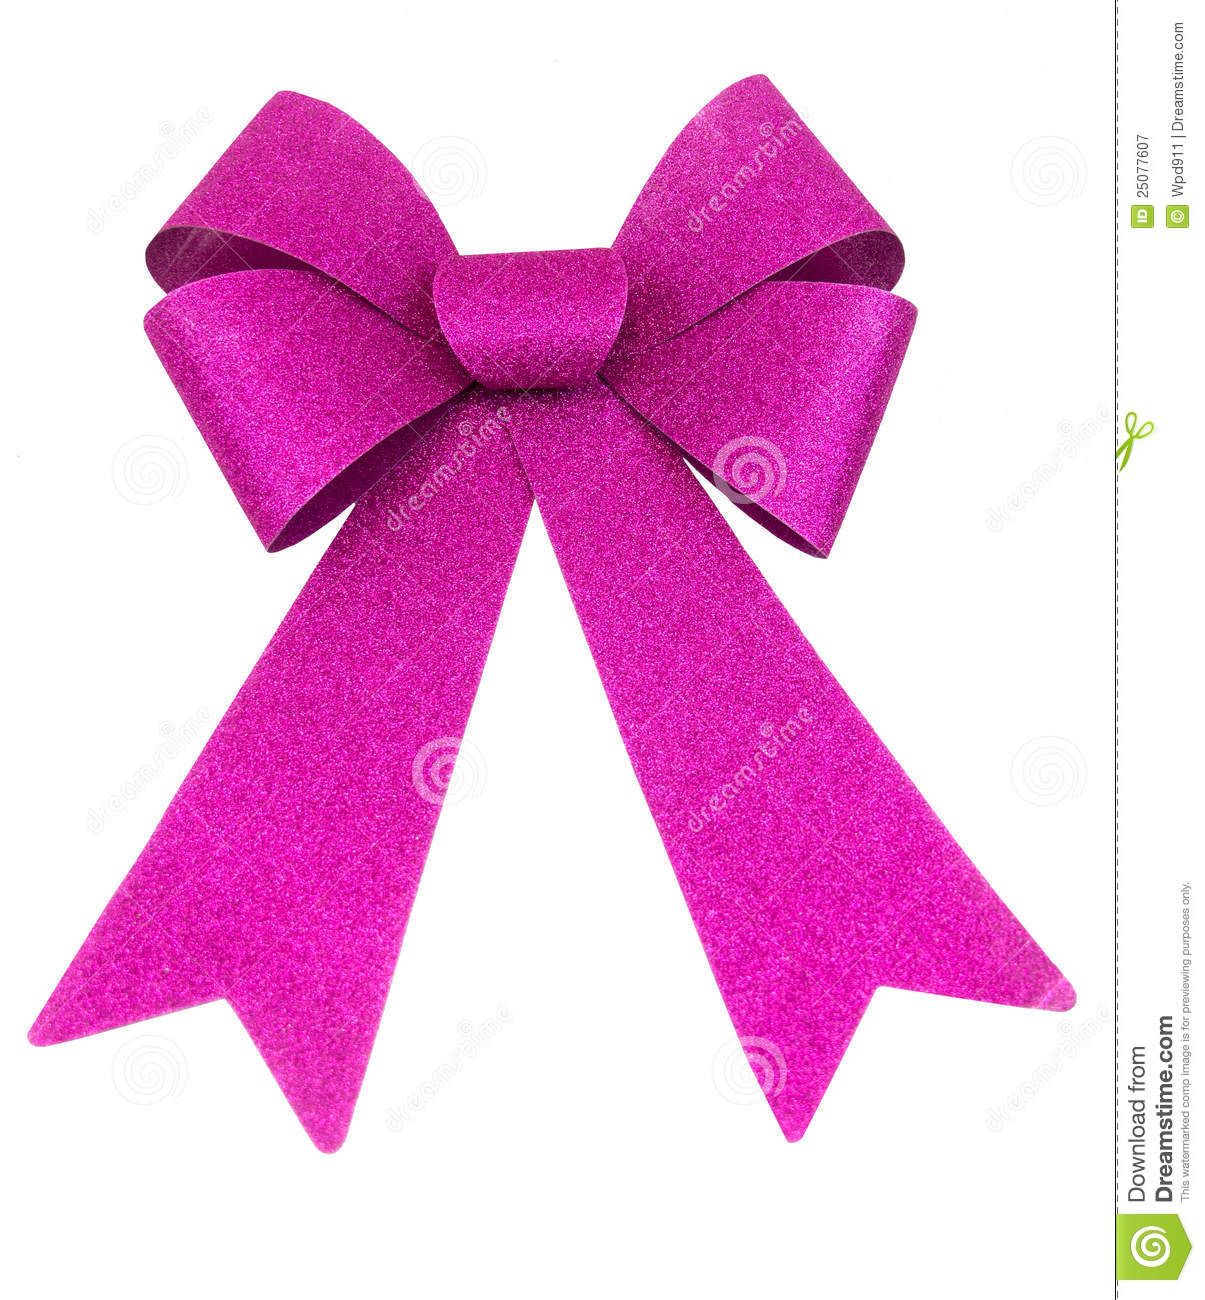 Purple Bow Royalty Free Stock Photography   Image  25077607